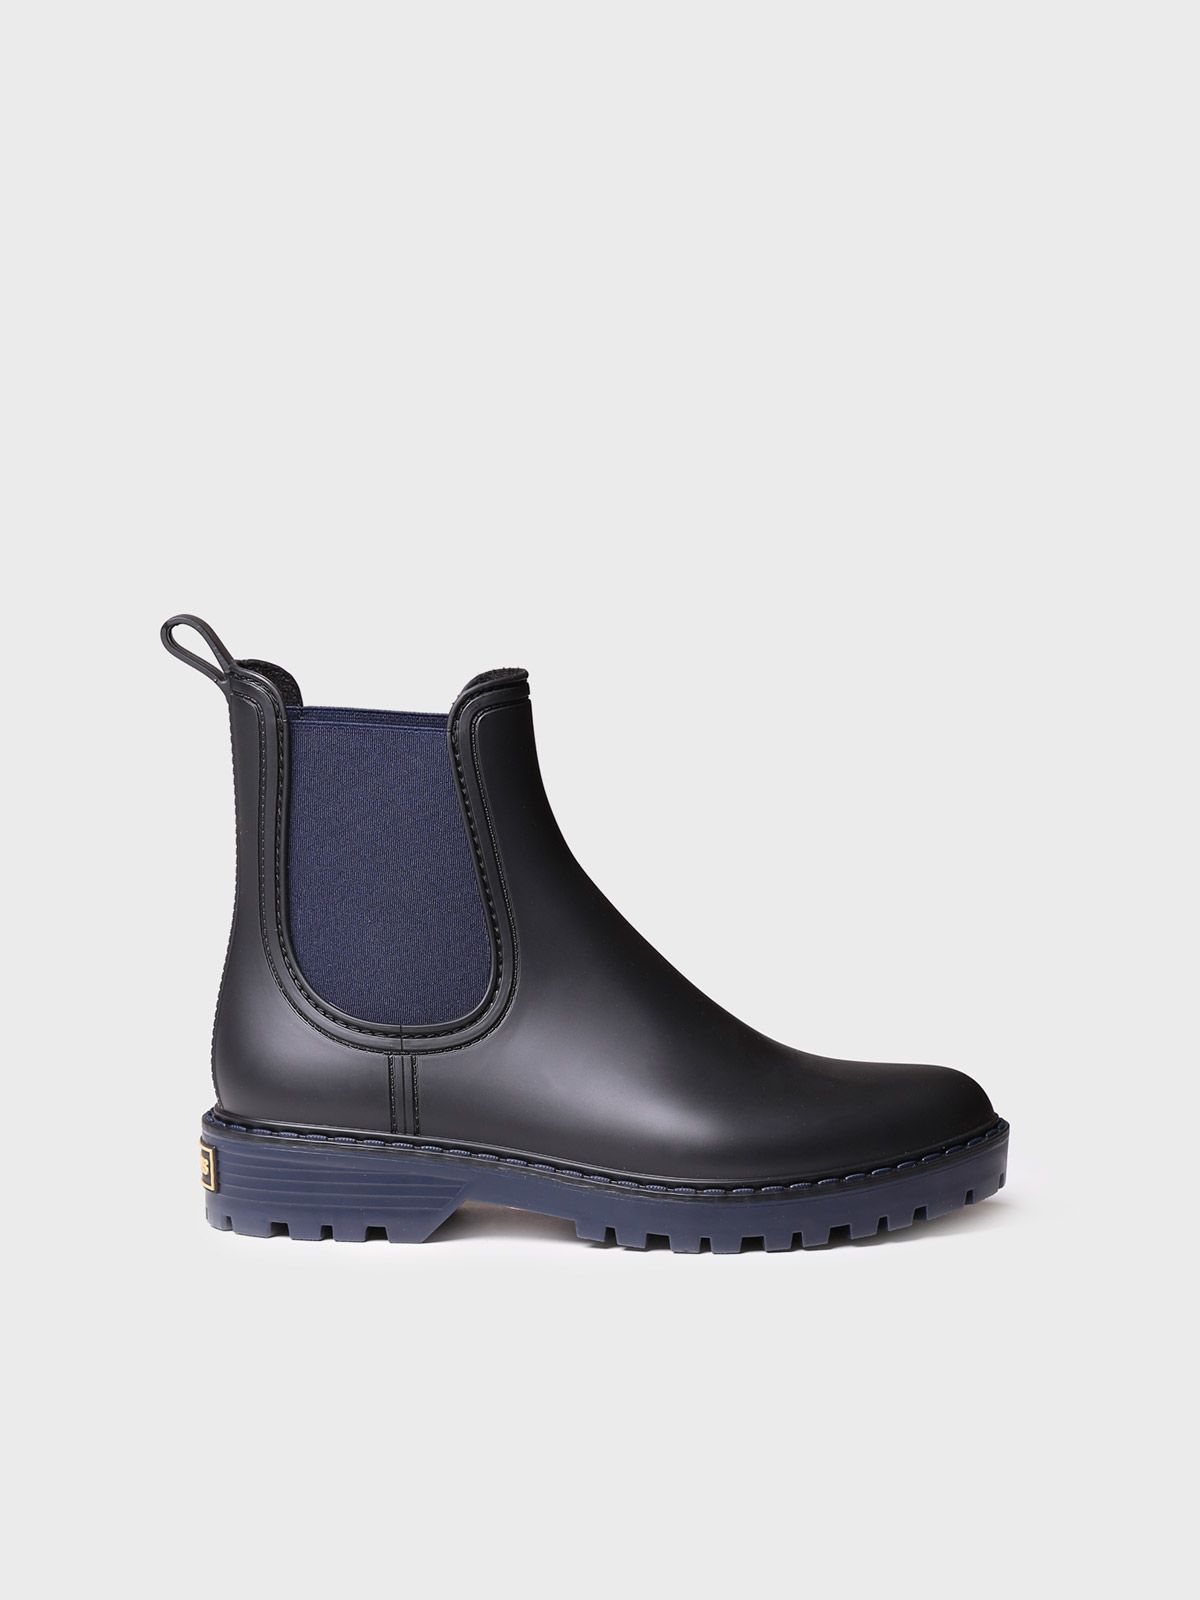 Rain boots for women made of rubber in matte shades - CAVOUR